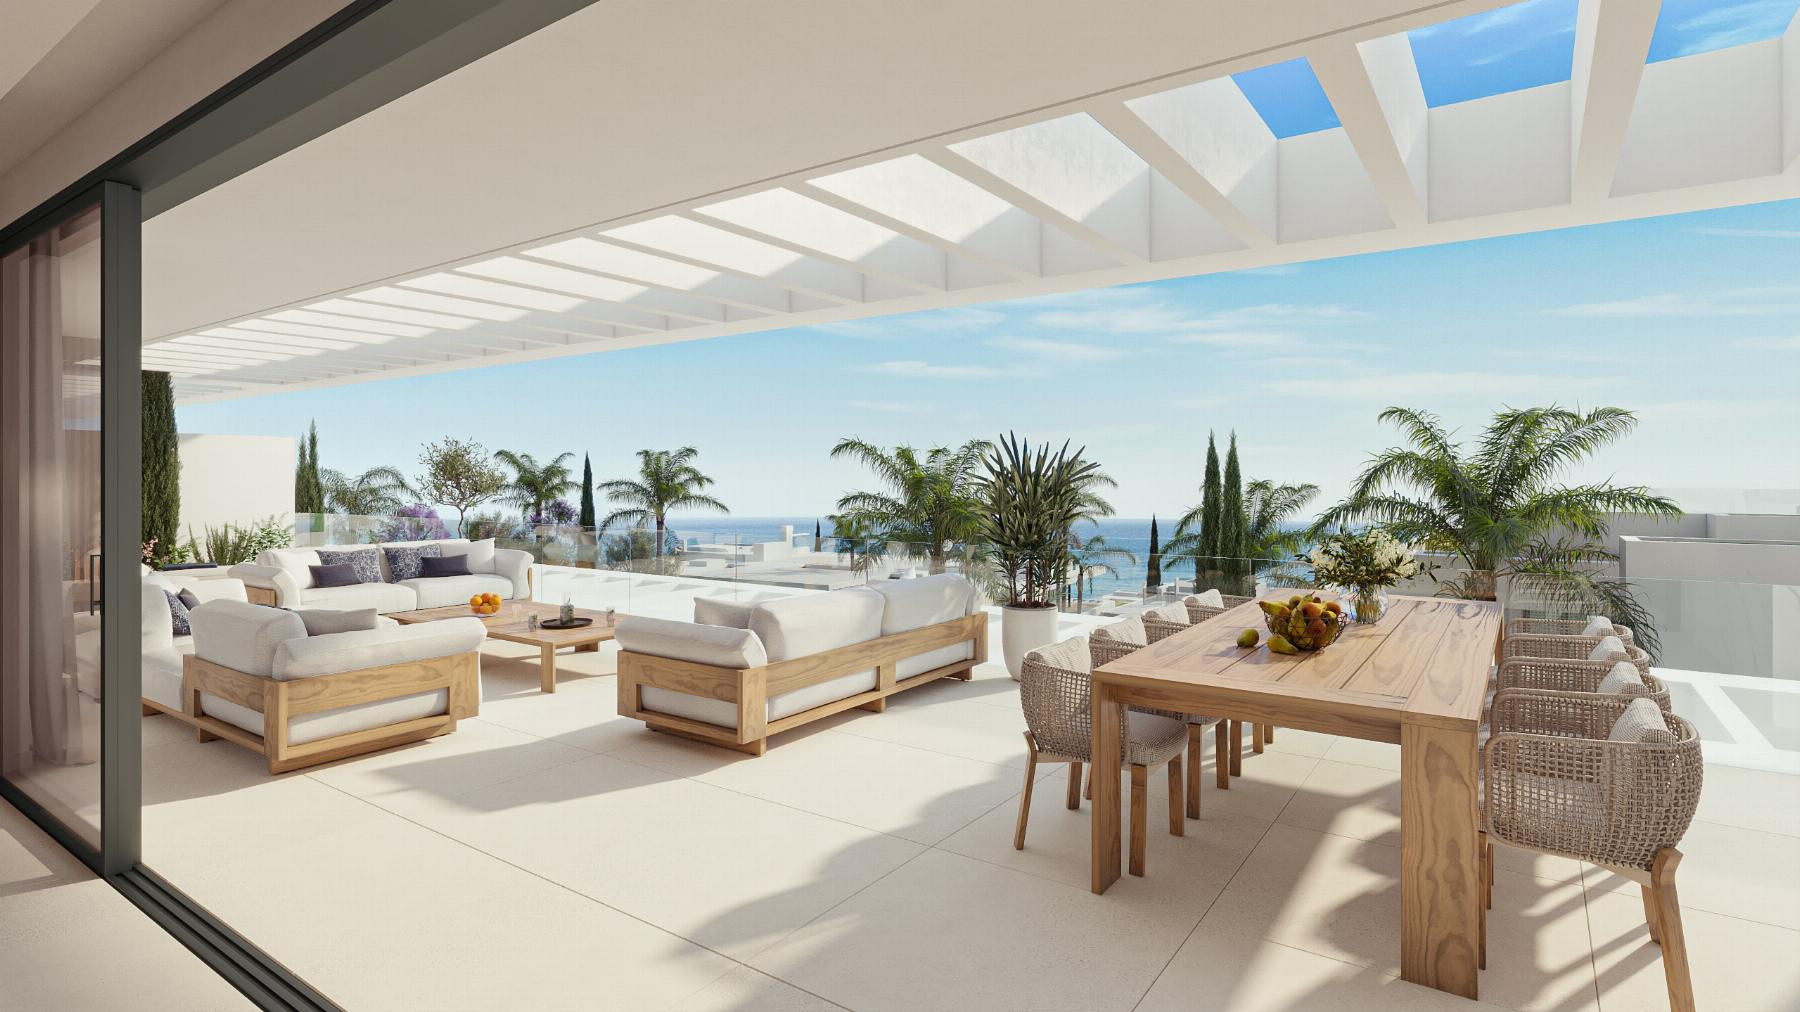 Stunning duplex penthouse in exclusive gated community 10 minutes from the center of Marbella and golf courses. | Image 17